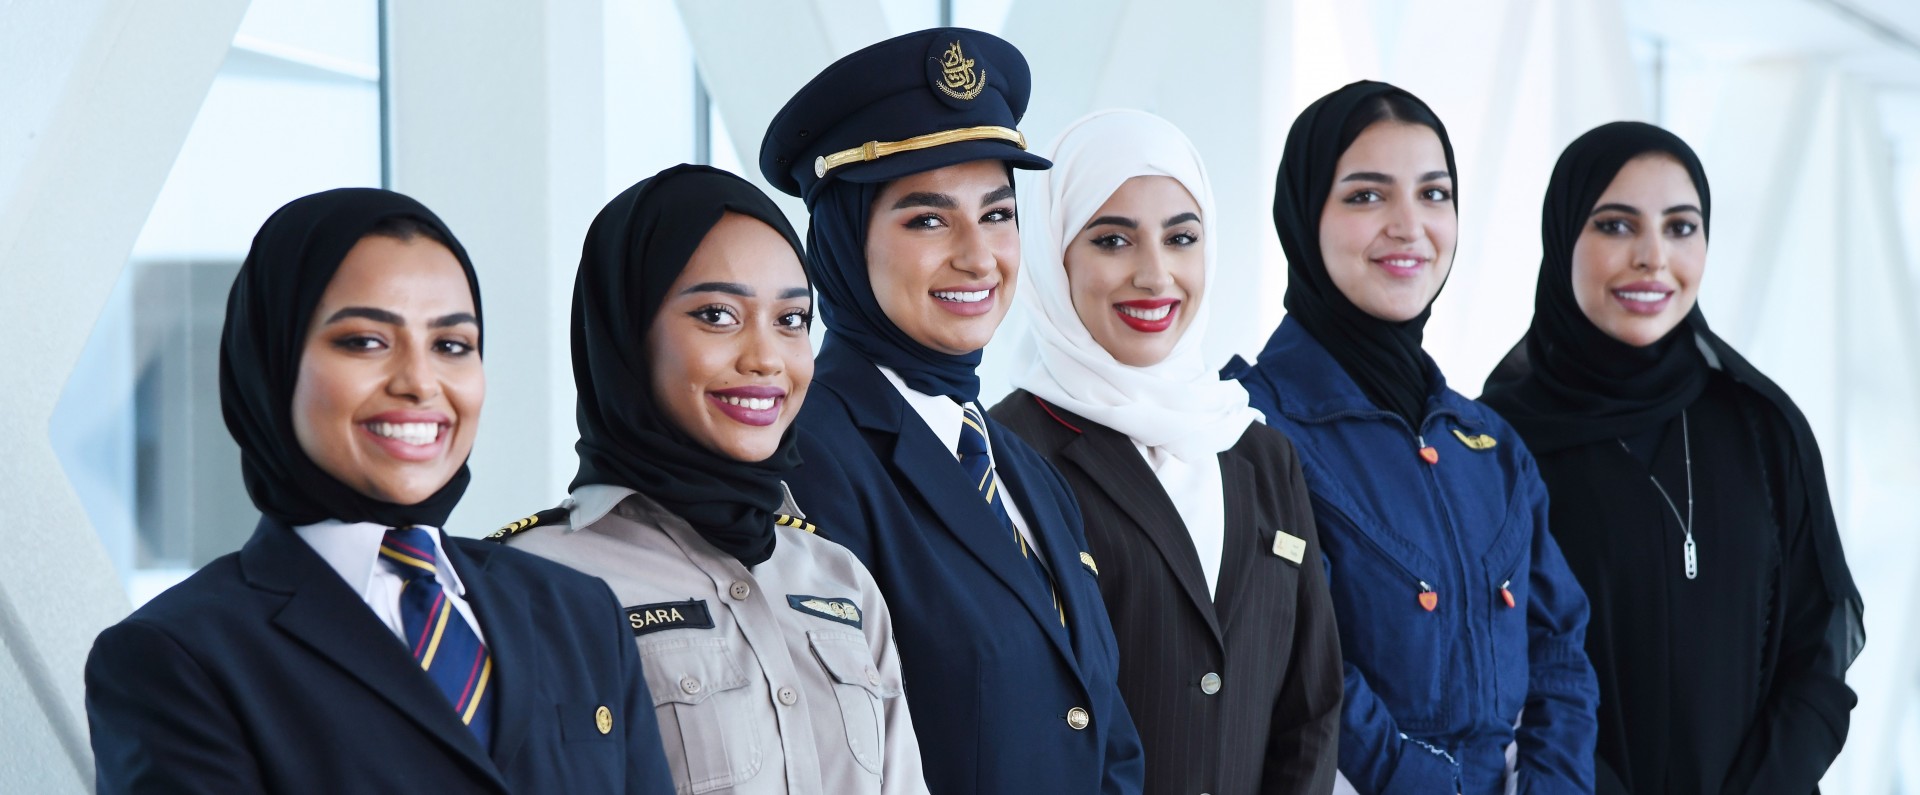 Emirates Group highlights Emirati women’s contributions to aviation and travel